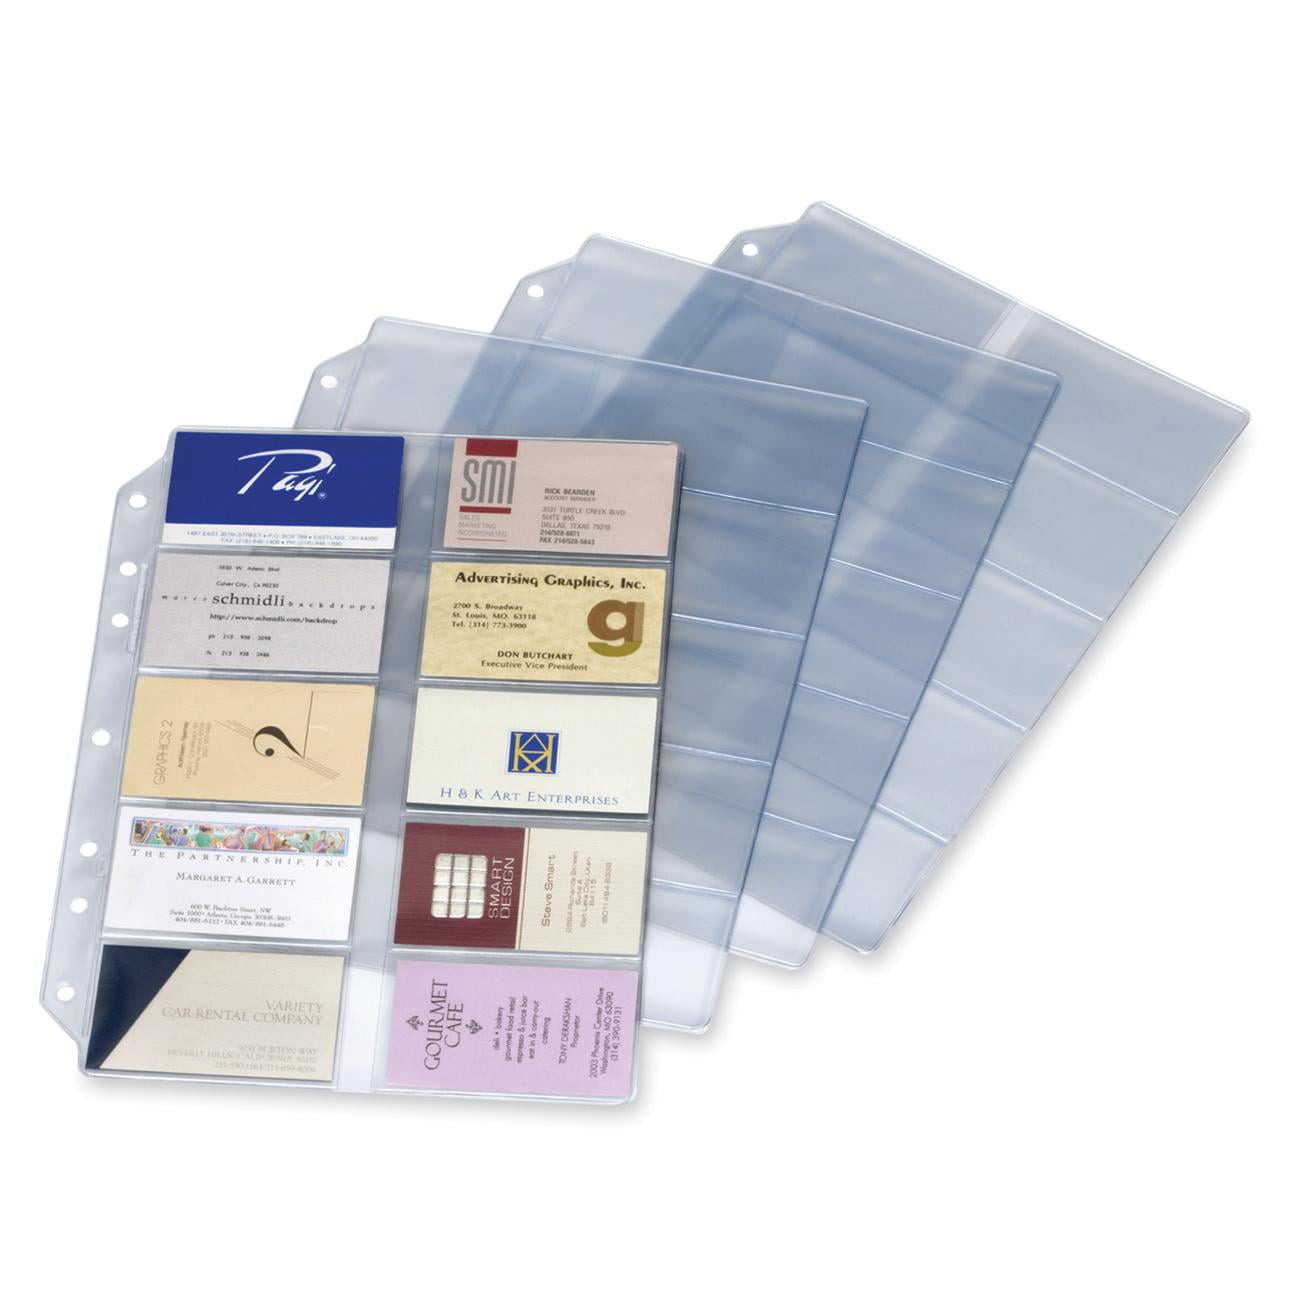 Basics Plastic Business Card Holder Protector Pages for 3-Ring Binder, 25-Pack